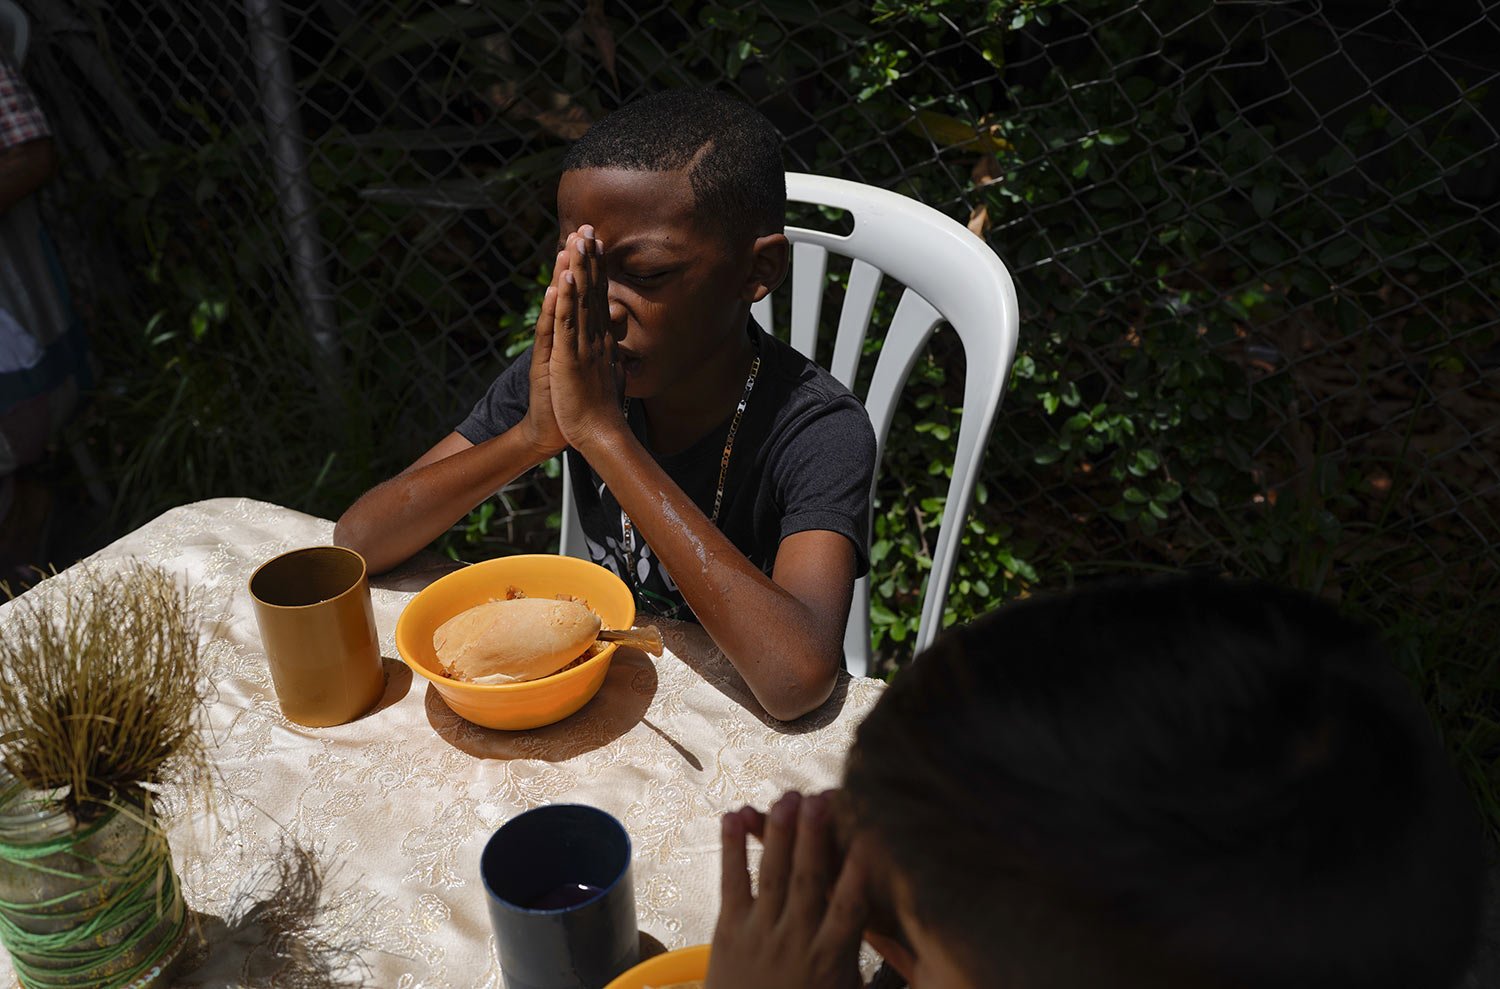  Boys say a prayer before digging into their free lunch donated by the New Birth's Christian church, in the Catia neighborhood of Caracas, Venezuela, Wednesday, June 8, 2022. (AP Photo/Ariana Cubillos) 